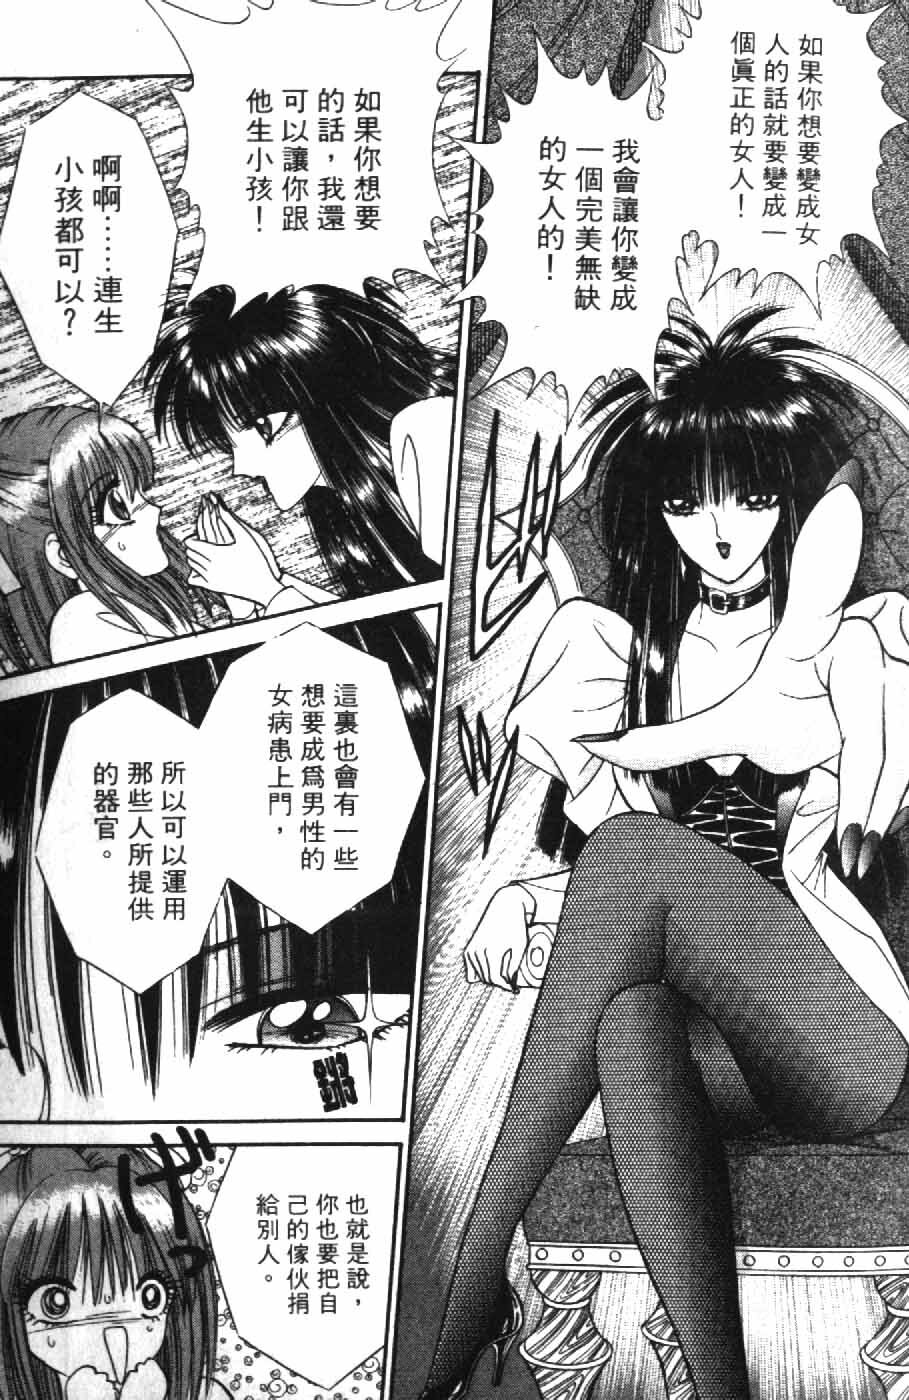 [Senno Knife] Ouma ga Horror Show 2 - Trans Sexual Special Show 2 | 顫慄博覽會 2 [Chinese] page 33 full